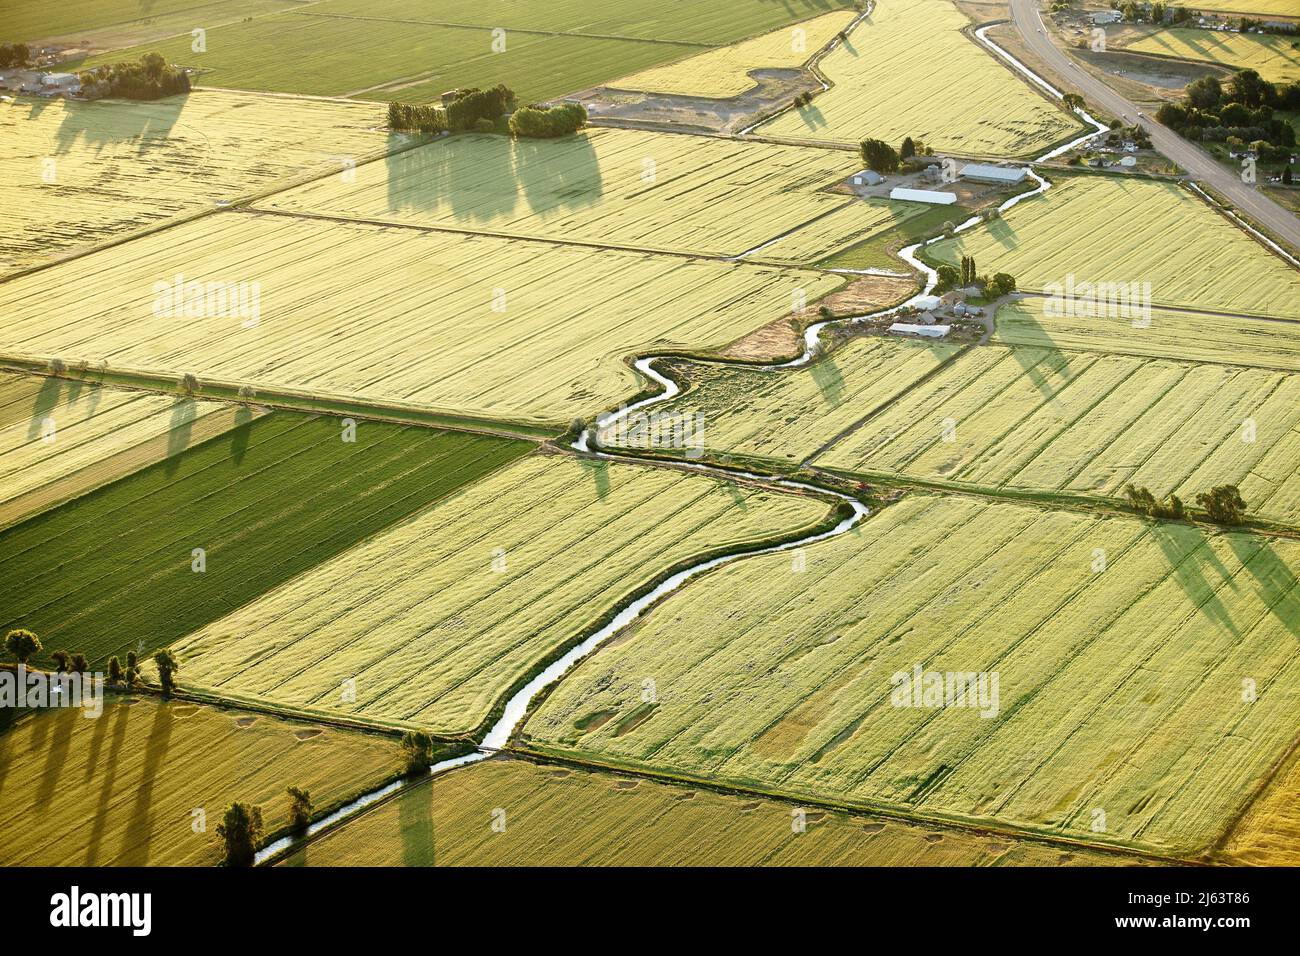 An aerial view of farmland and irrigation canals running throught the fields. Stock Photo